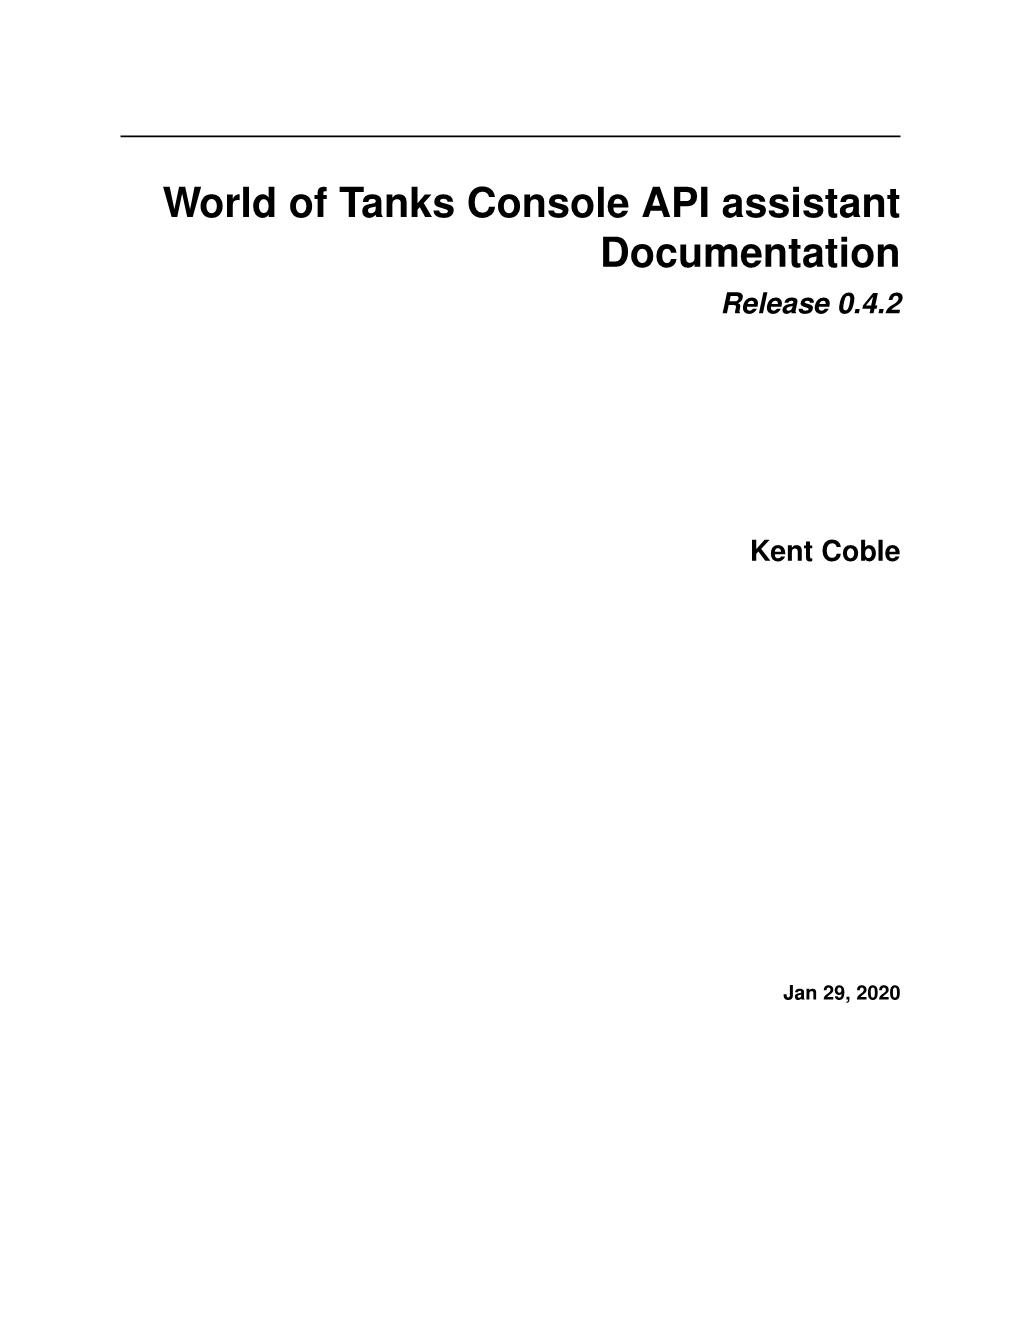 World of Tanks Console API Assistant Documentation Release 0.4.2